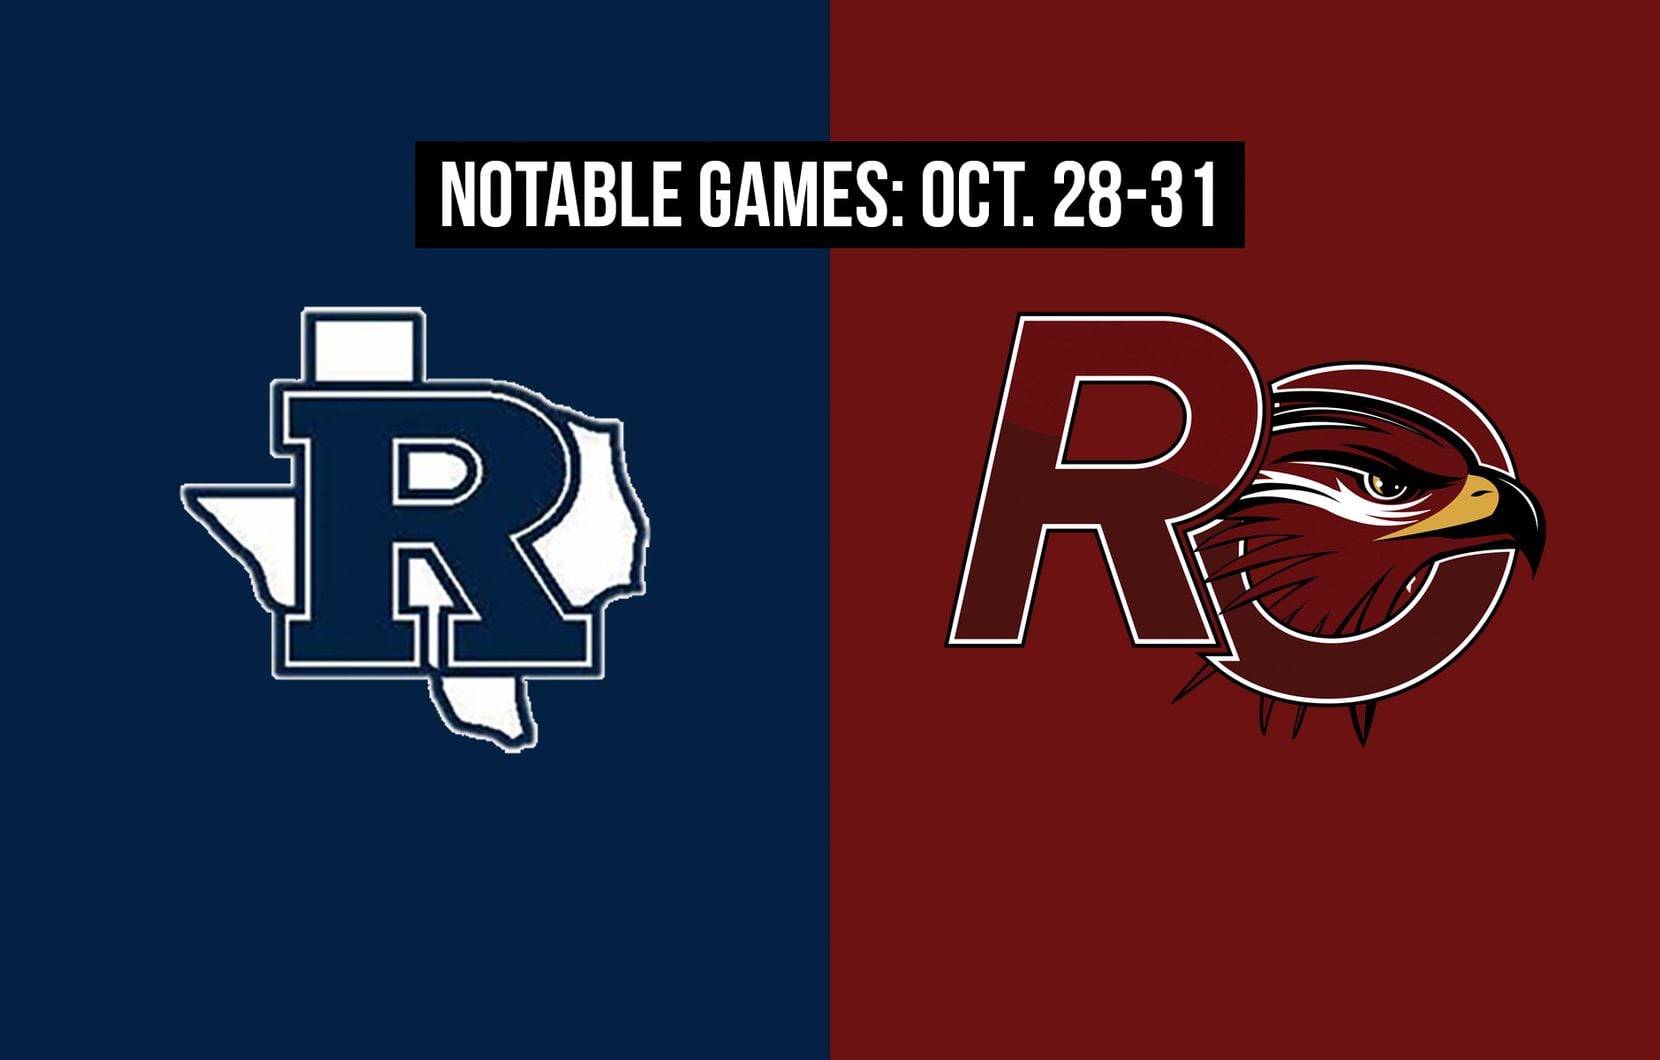 Notable games for the week of Oct. 28-31 of the 2020 season: Richland vs. Red Oak.